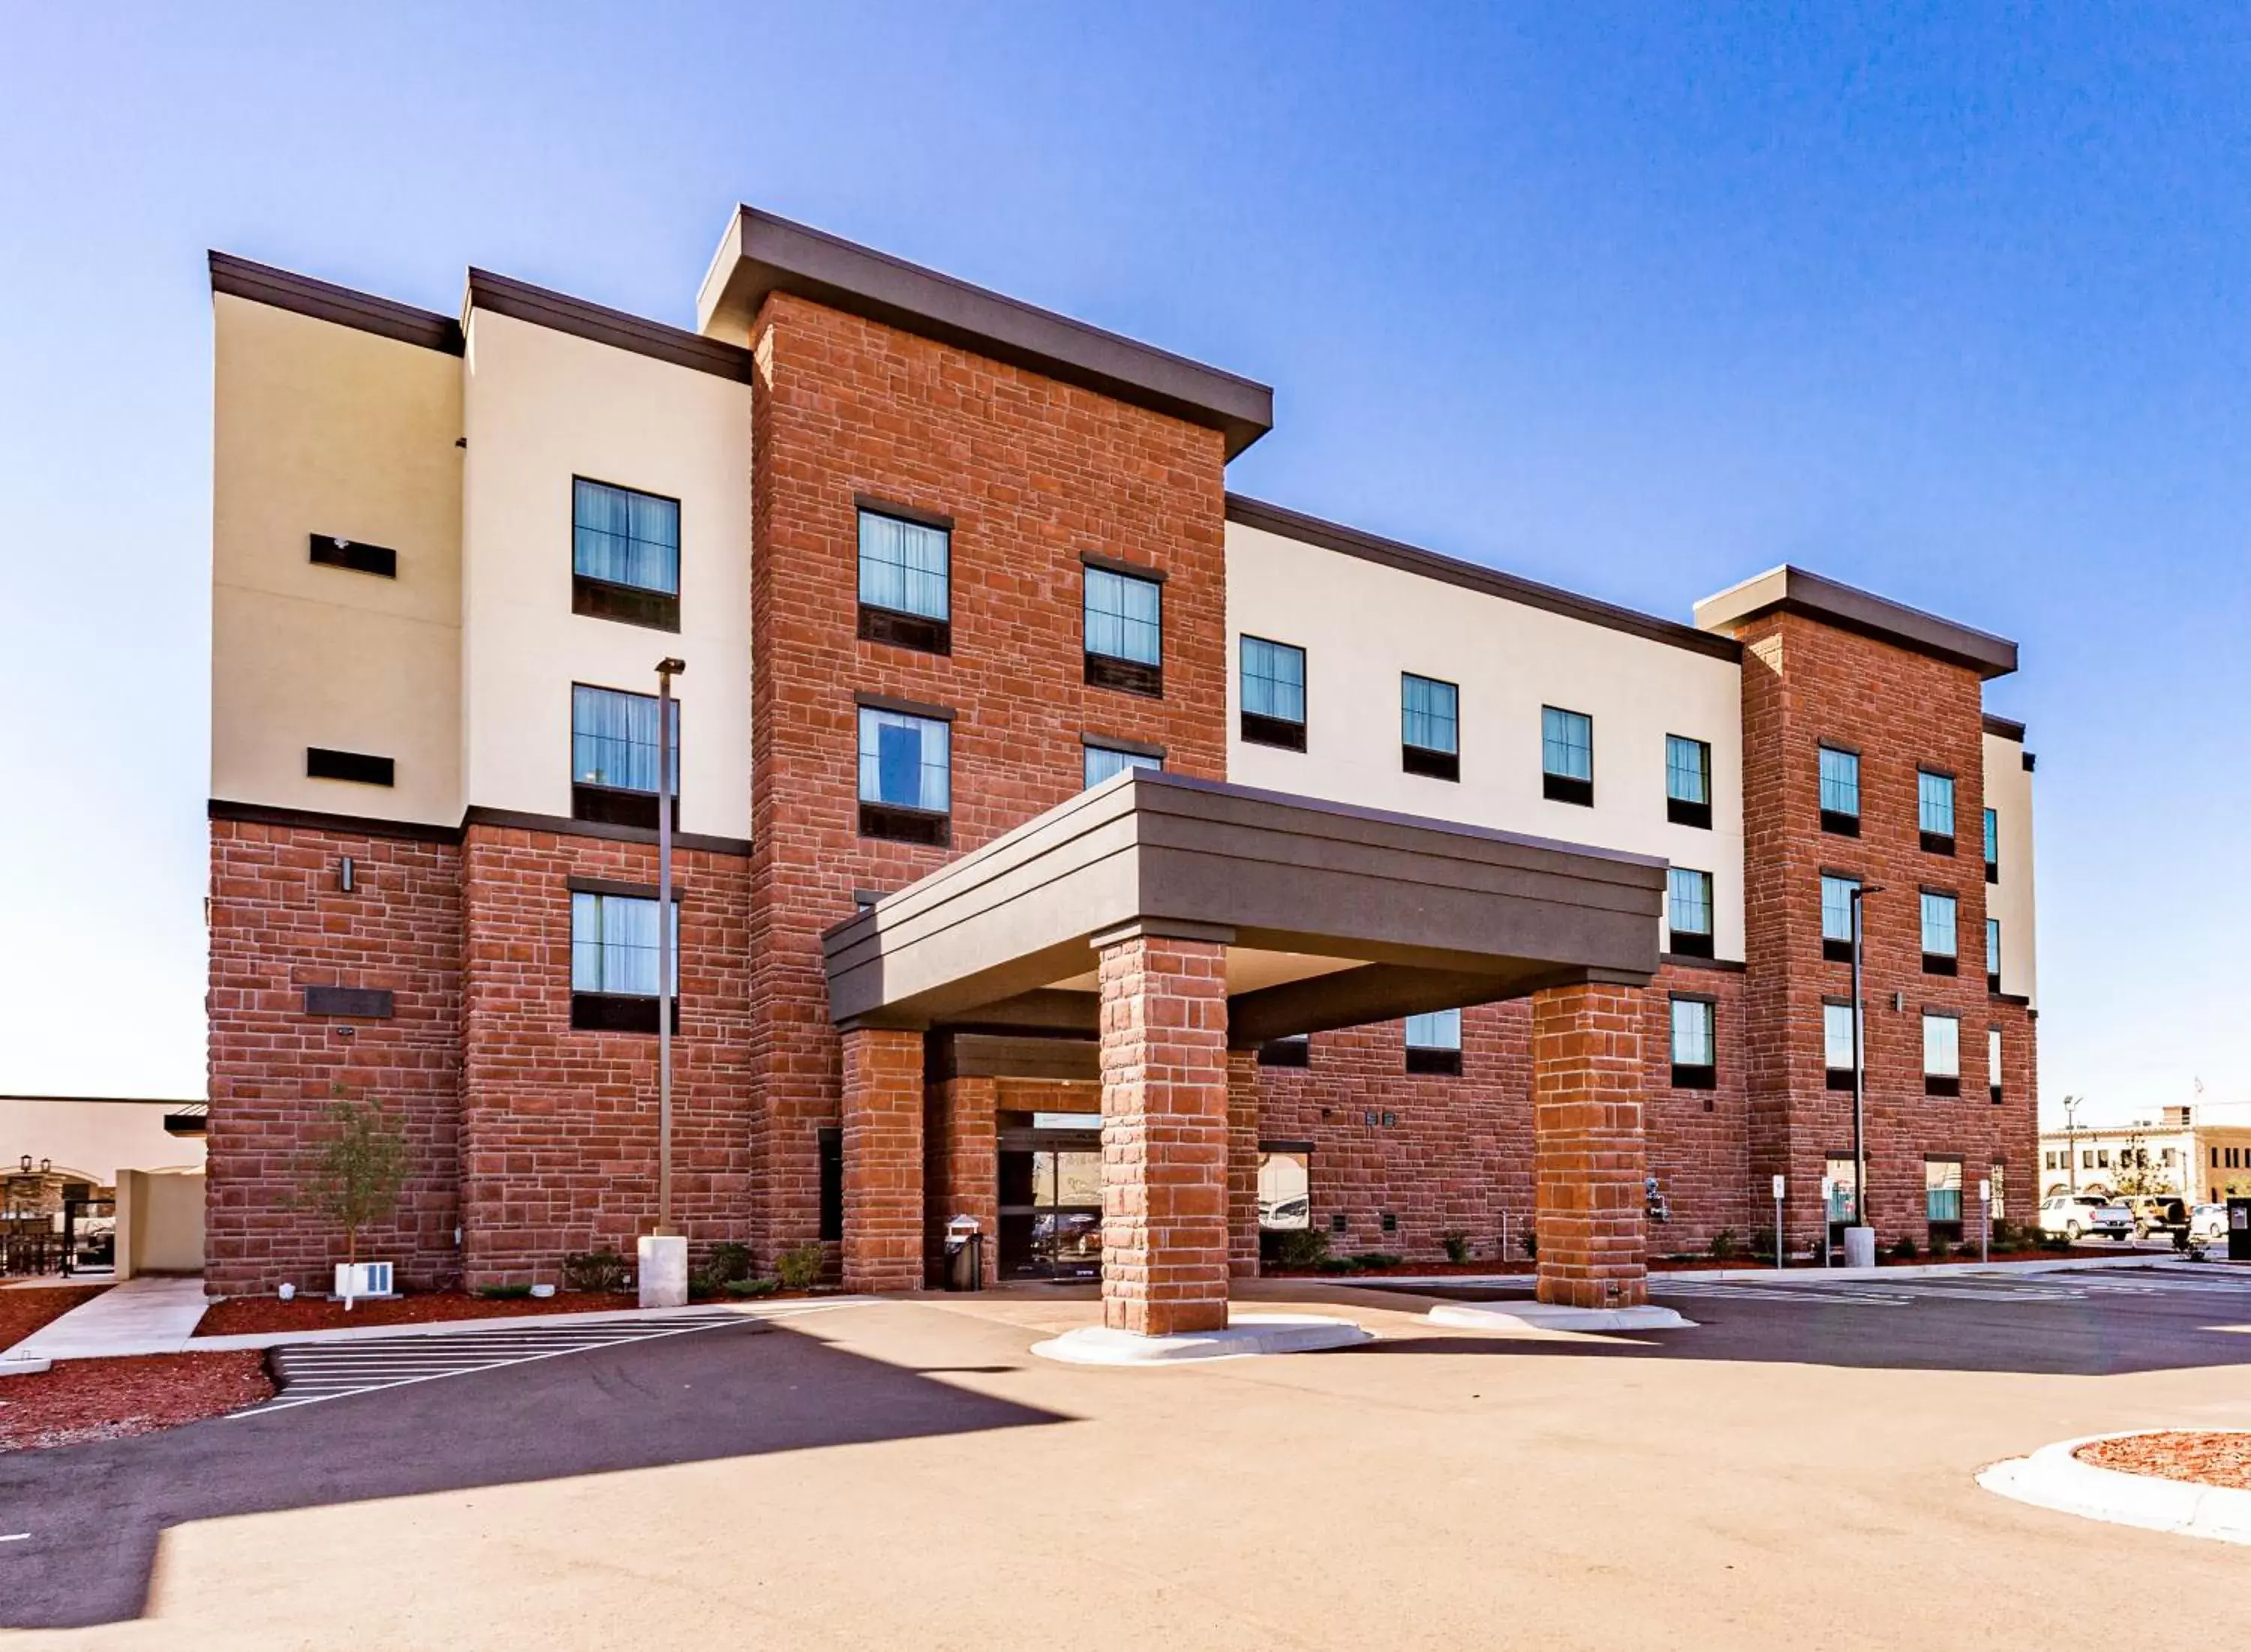 Property Building in Cobblestone Hotel & Suites - Superior Duluth